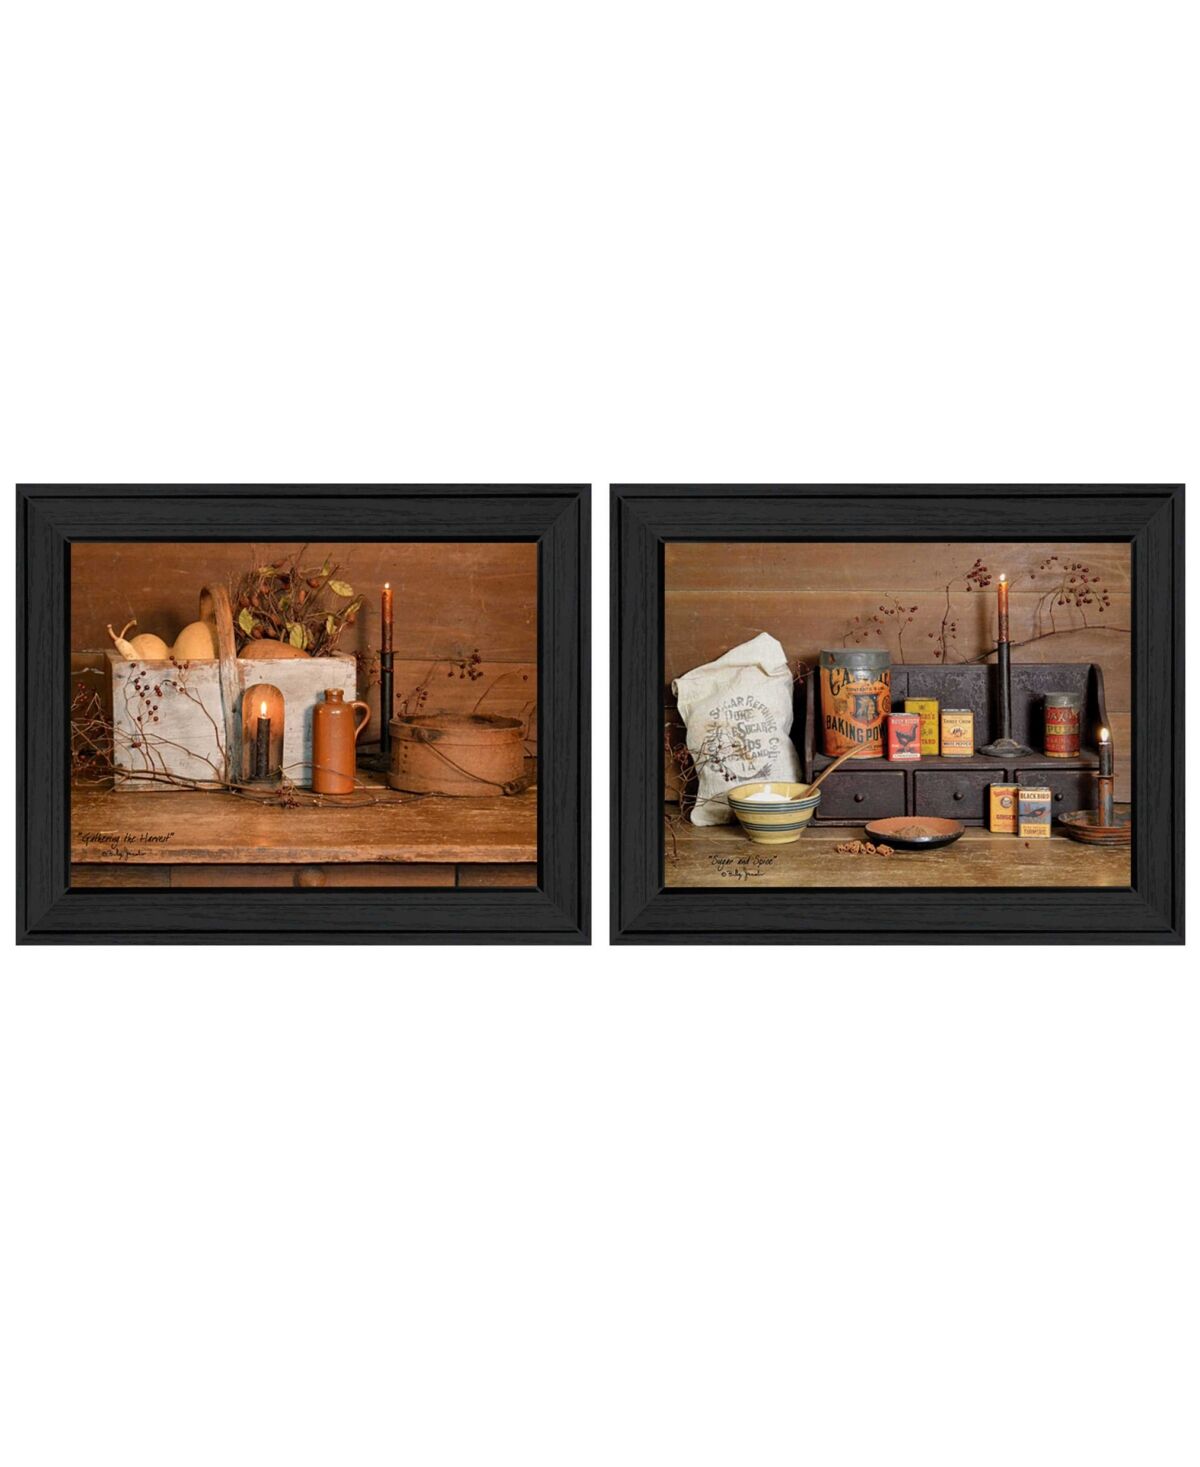 Trendy Decor 4U Baking Supplies Collection By Billy Jacobs, Printed Wall Art, Ready to hang, Black Frame, 18